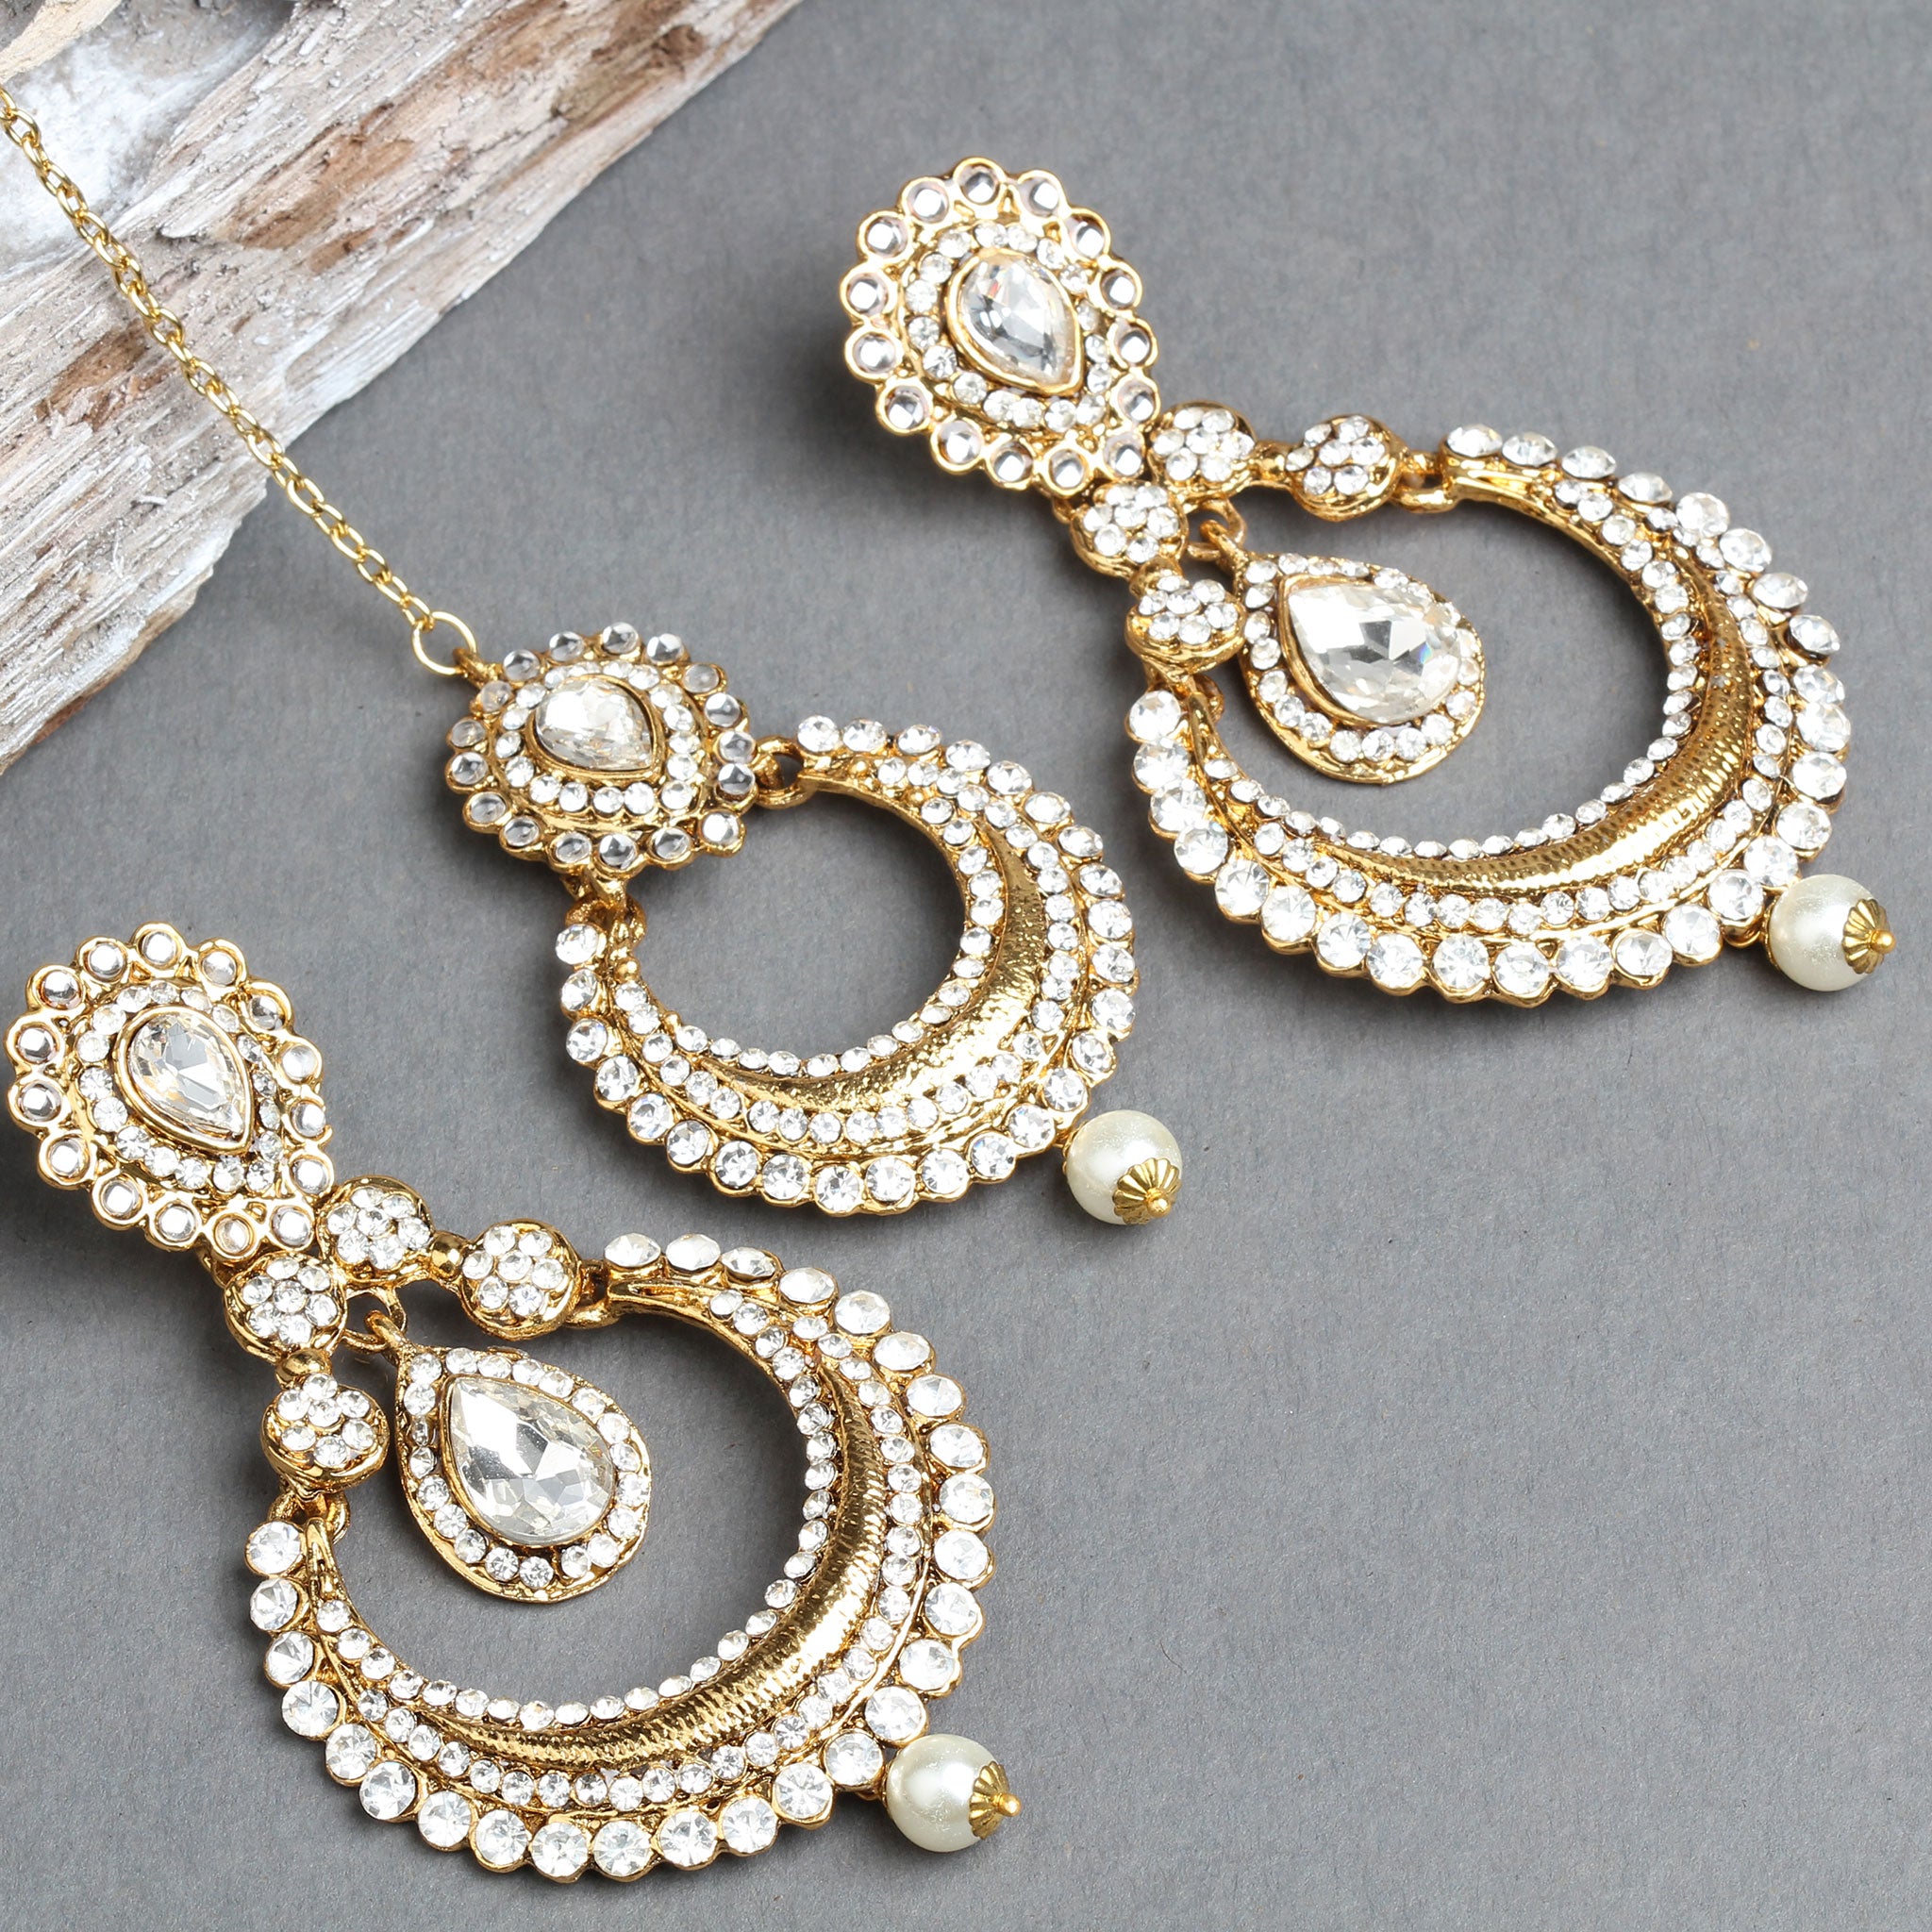 Traditional Grey Earrings with Maang Tikka for Party | FashionCrab.com